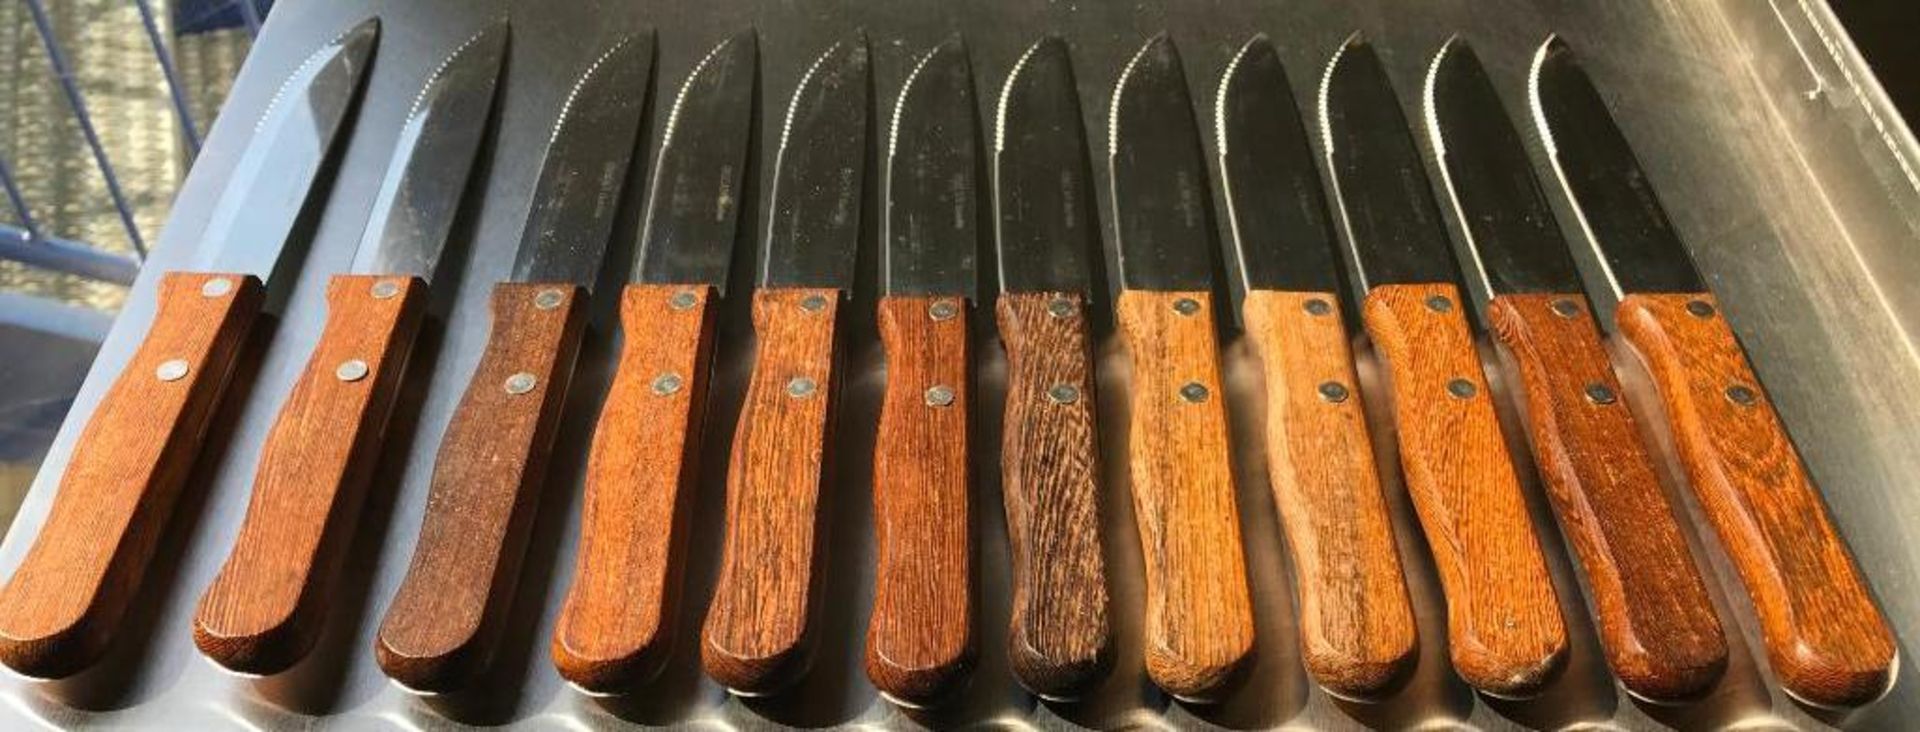 STEAK KNIVES, WOOD HANDLE, POINTED TIP - LOT OF 12 - Image 4 of 8